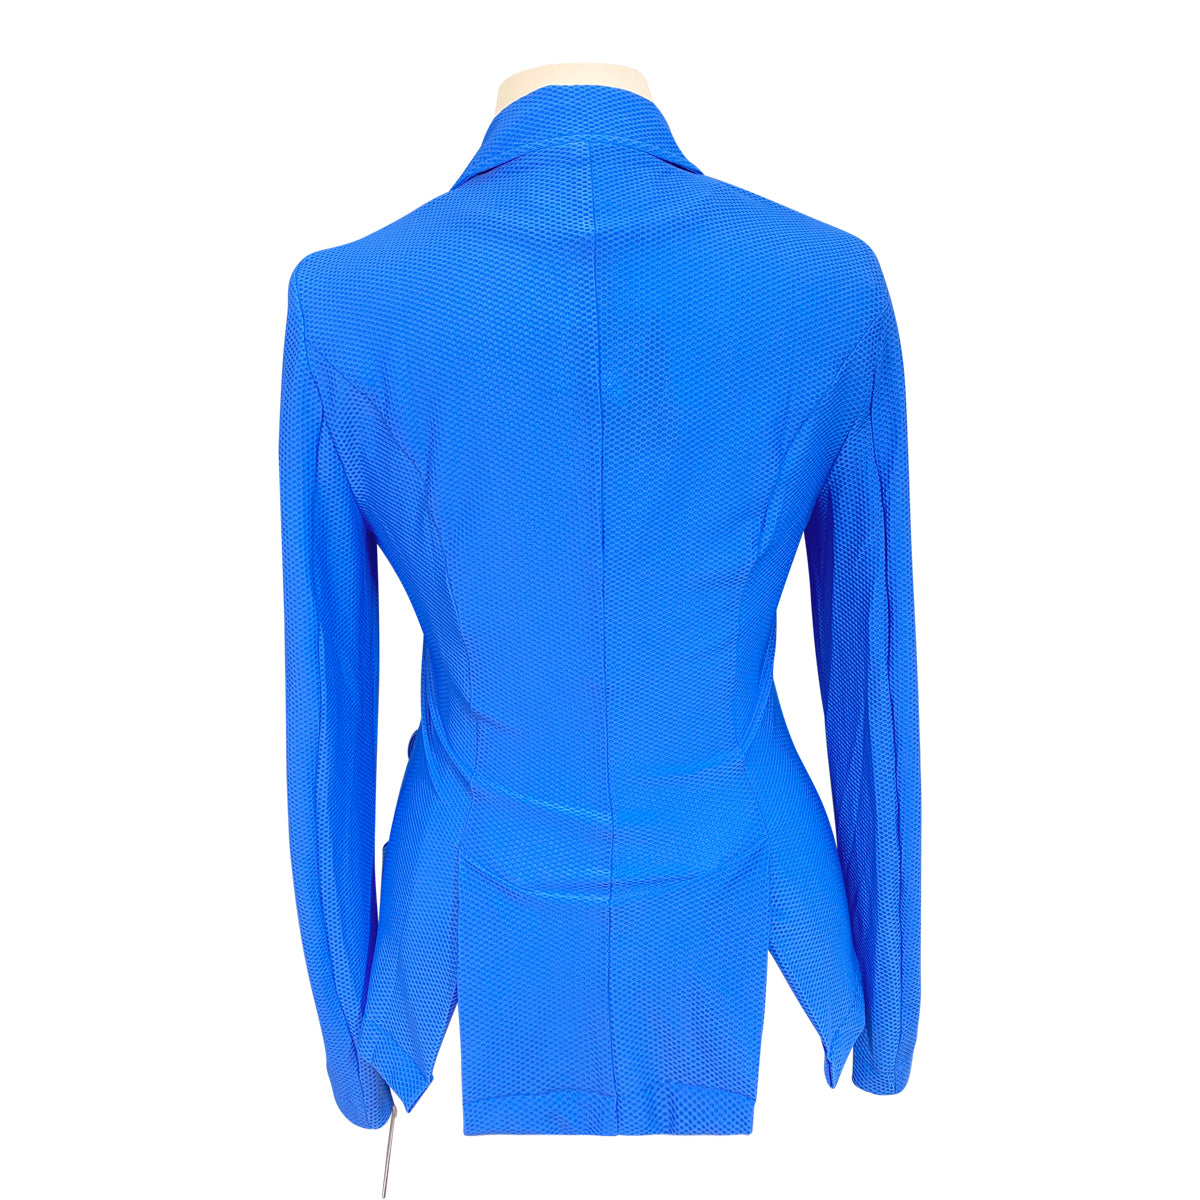 Amore Equestrian 'Aire' Show Jacket in Royal Blue